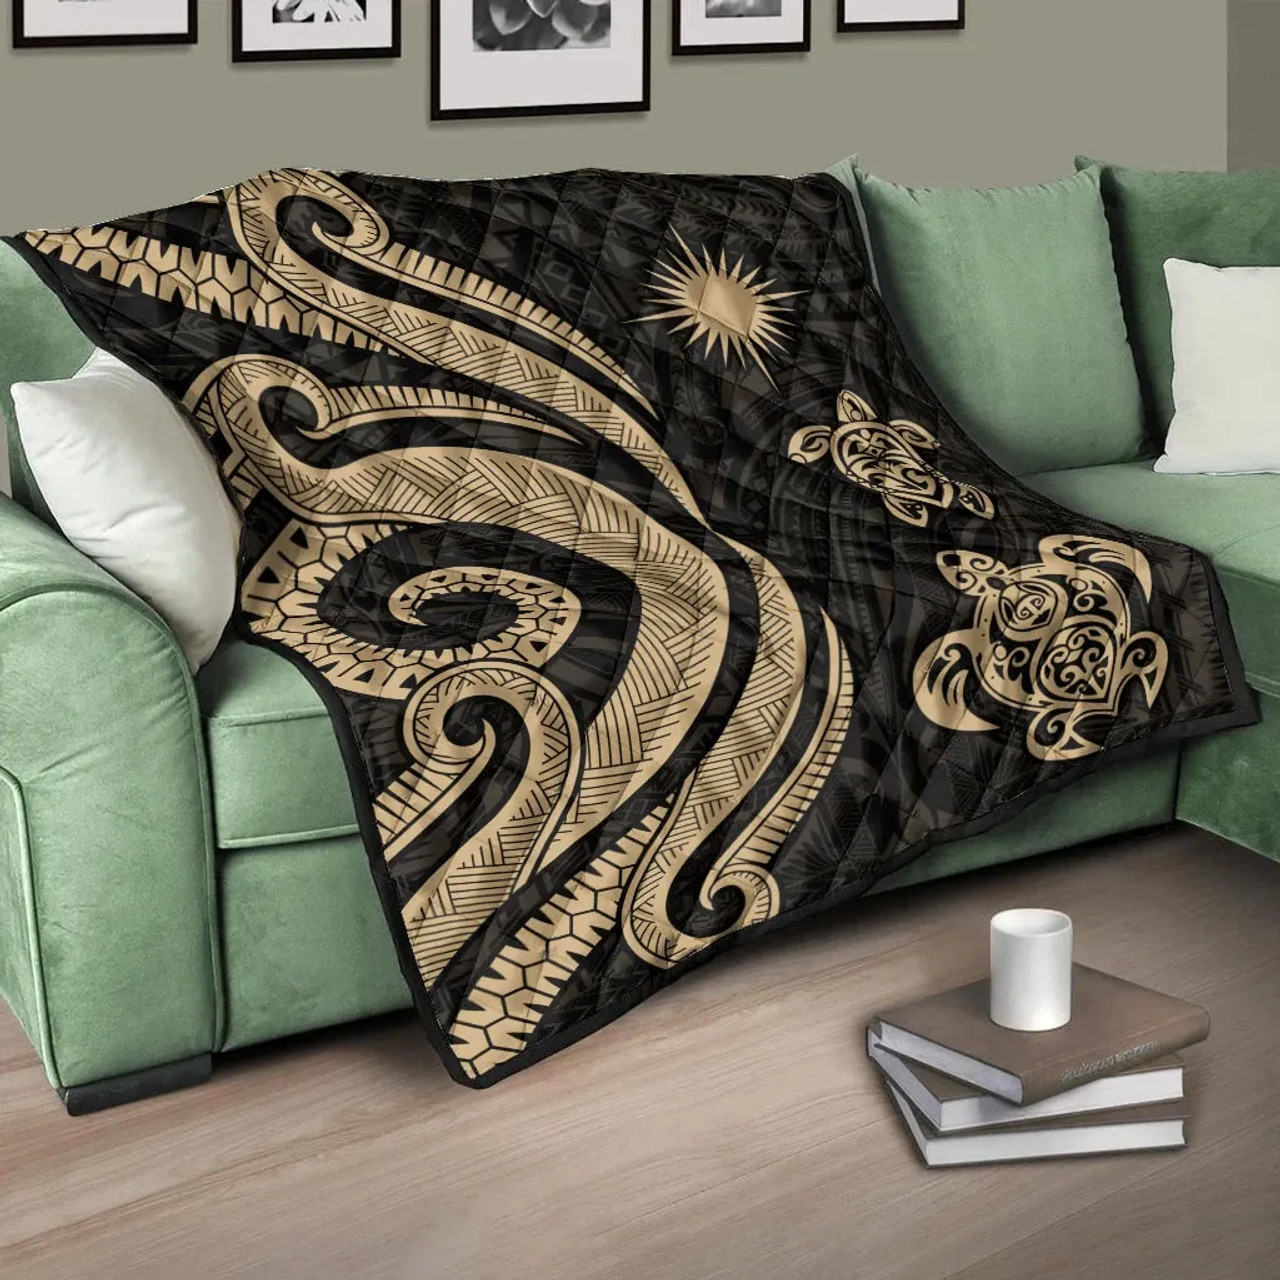 Marshall Islands Premium Quilt - Gold Tentacle Turtle 5